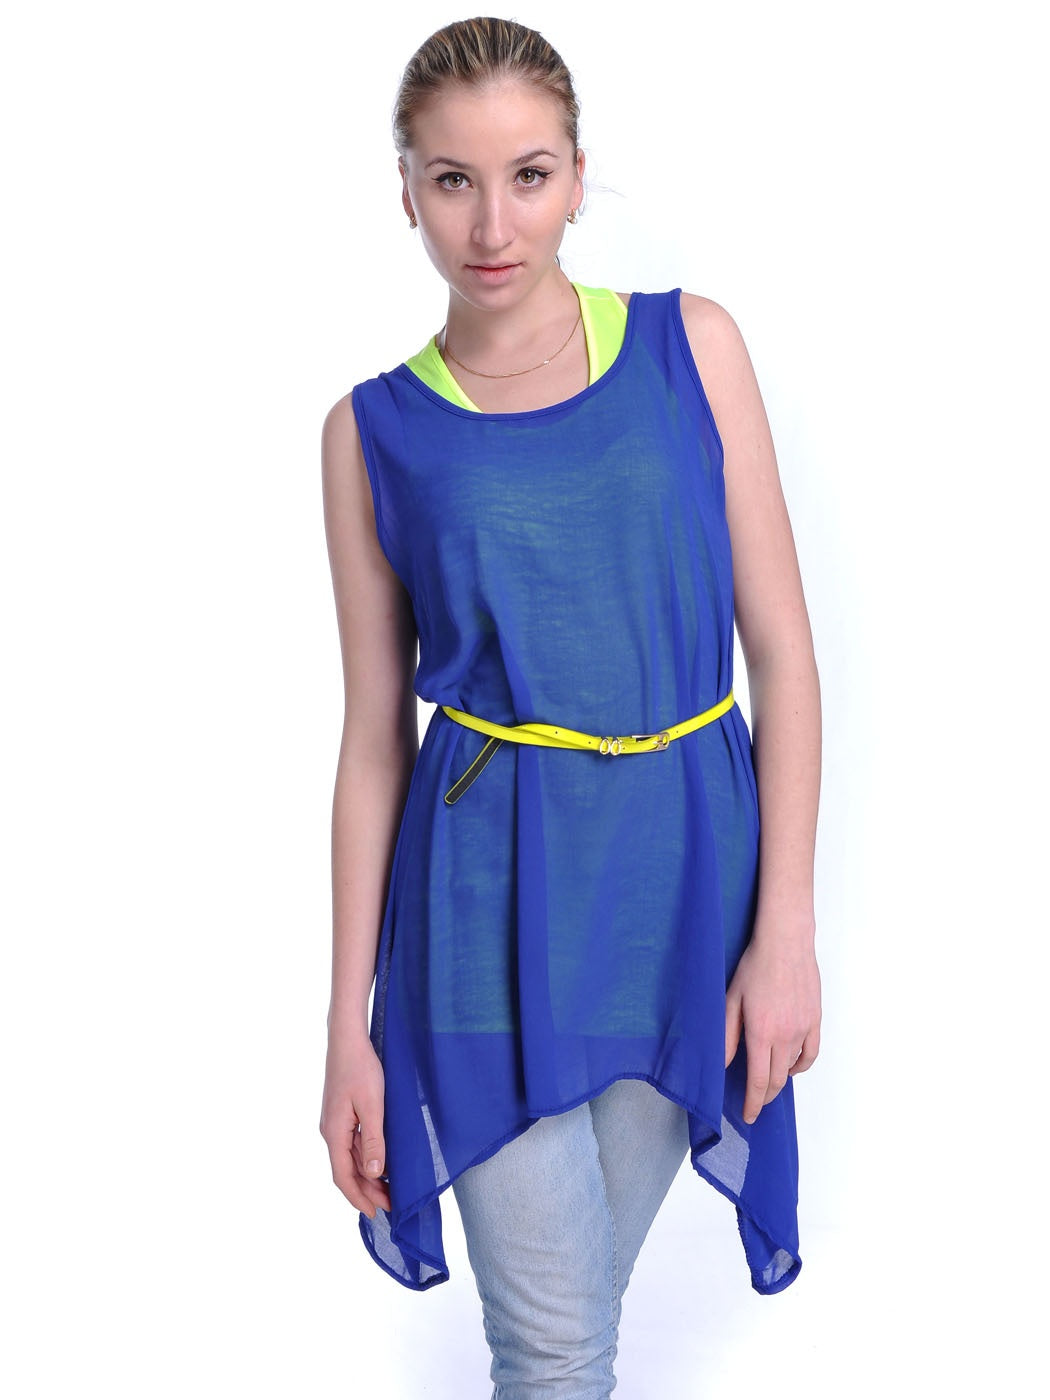 Blue Uneven Hem with Bright Neon Yellow Belted Waist Tank